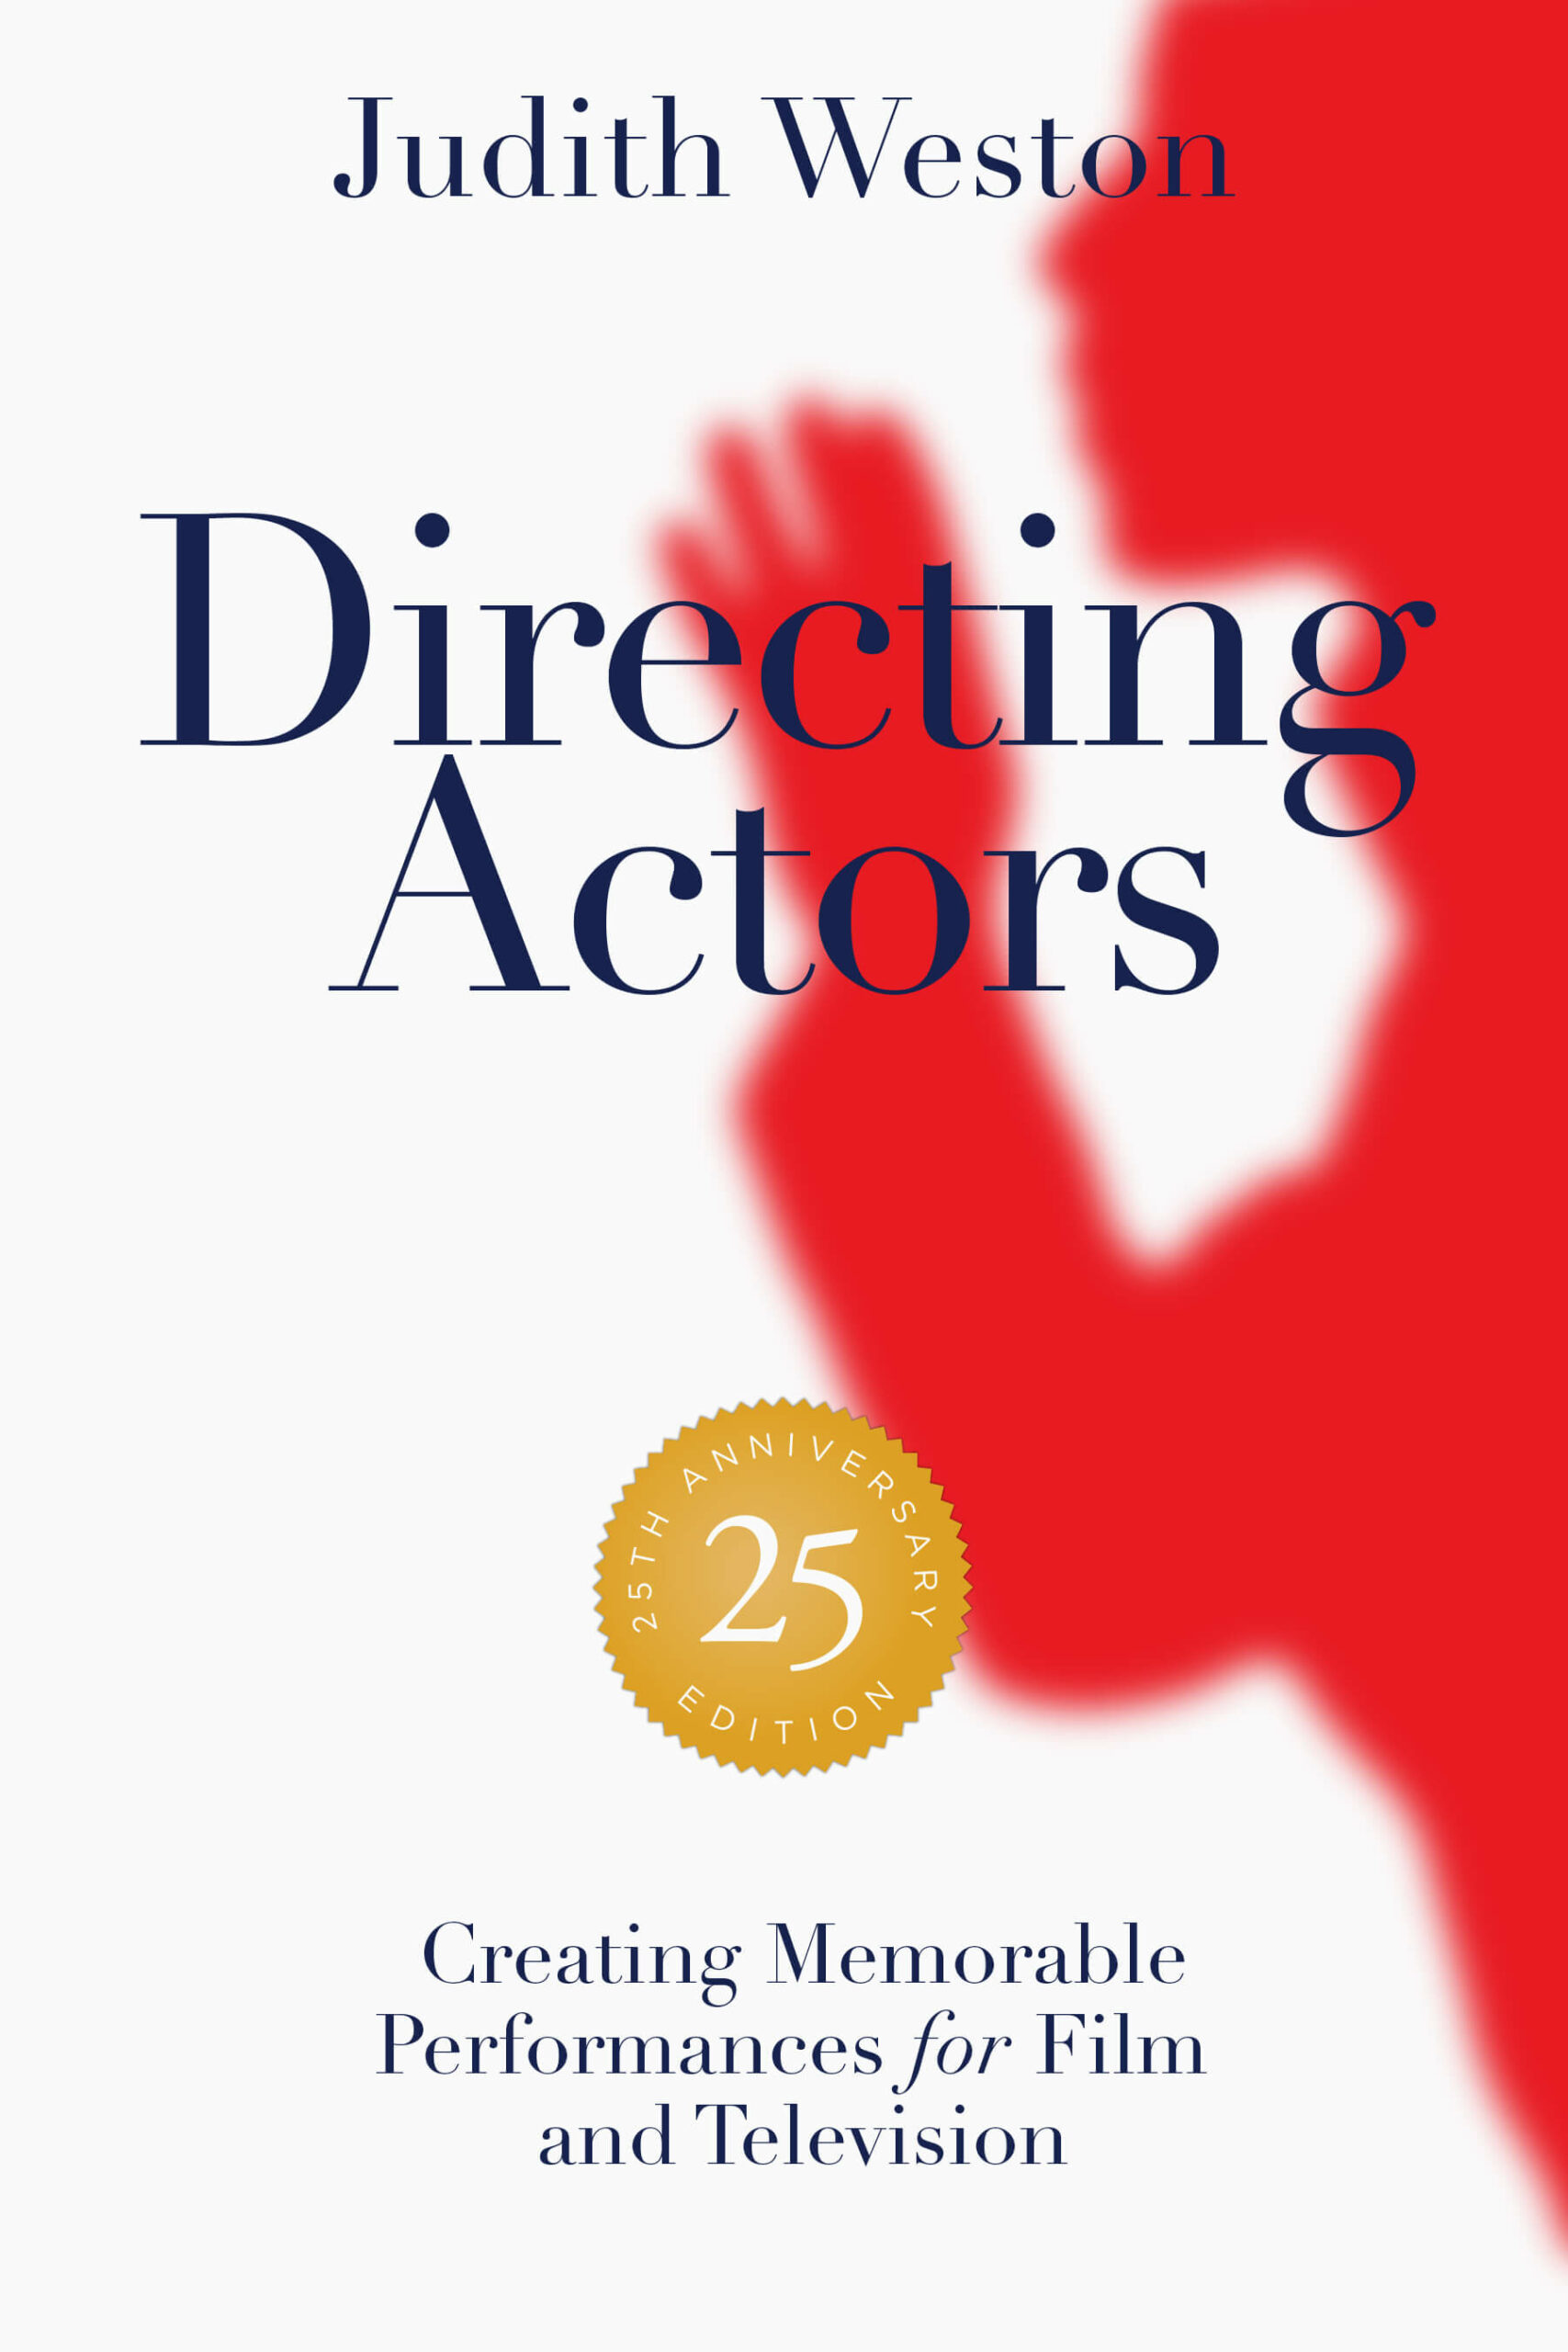 Directing Actors – 25th Anniversary Edition: Creating Memorable Performances for Film and Television